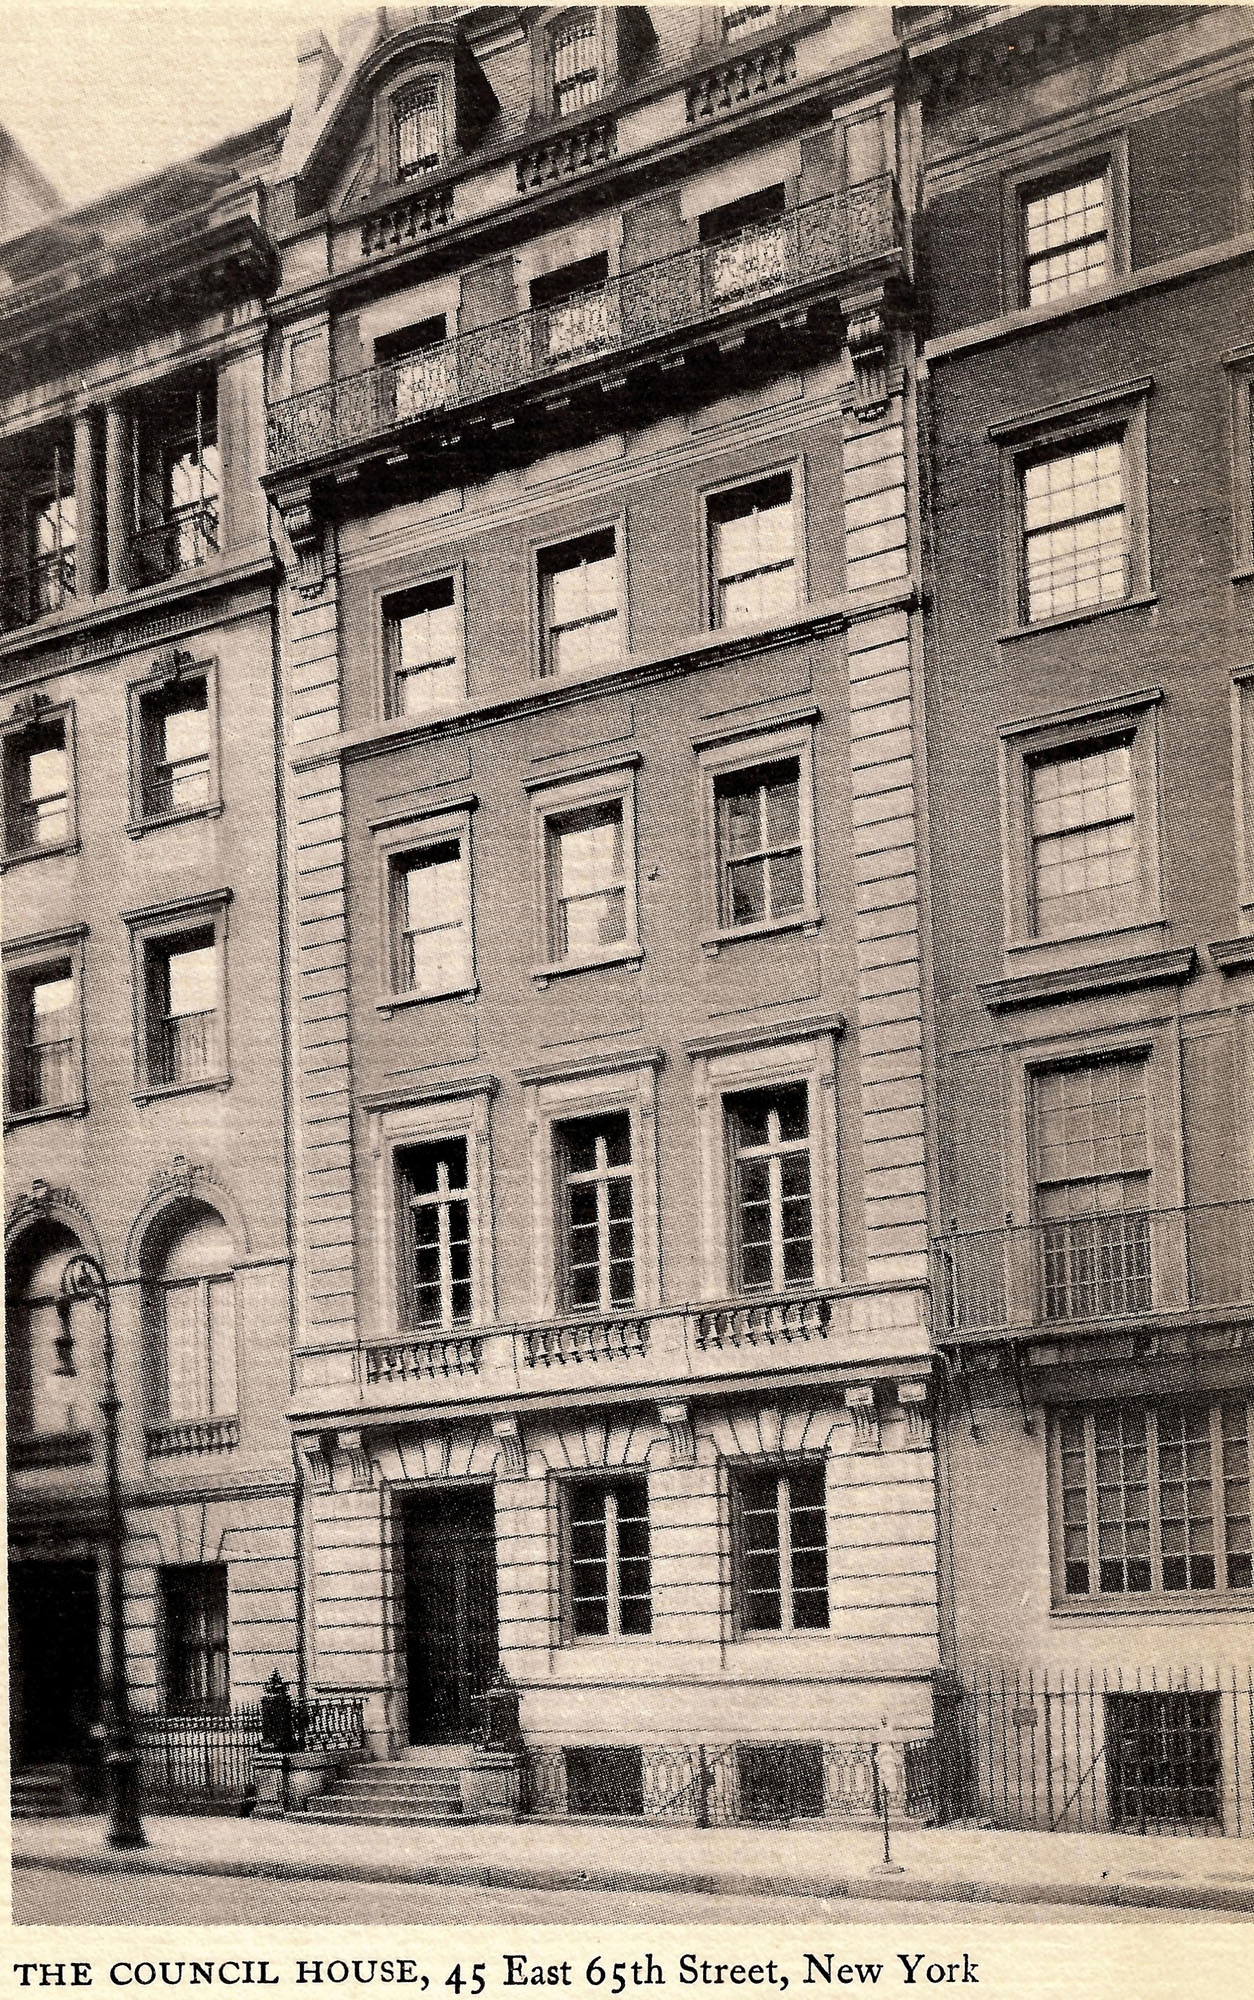 CFR moves into 45 East 65th Street building, its New York headquarters for the next fifteen years